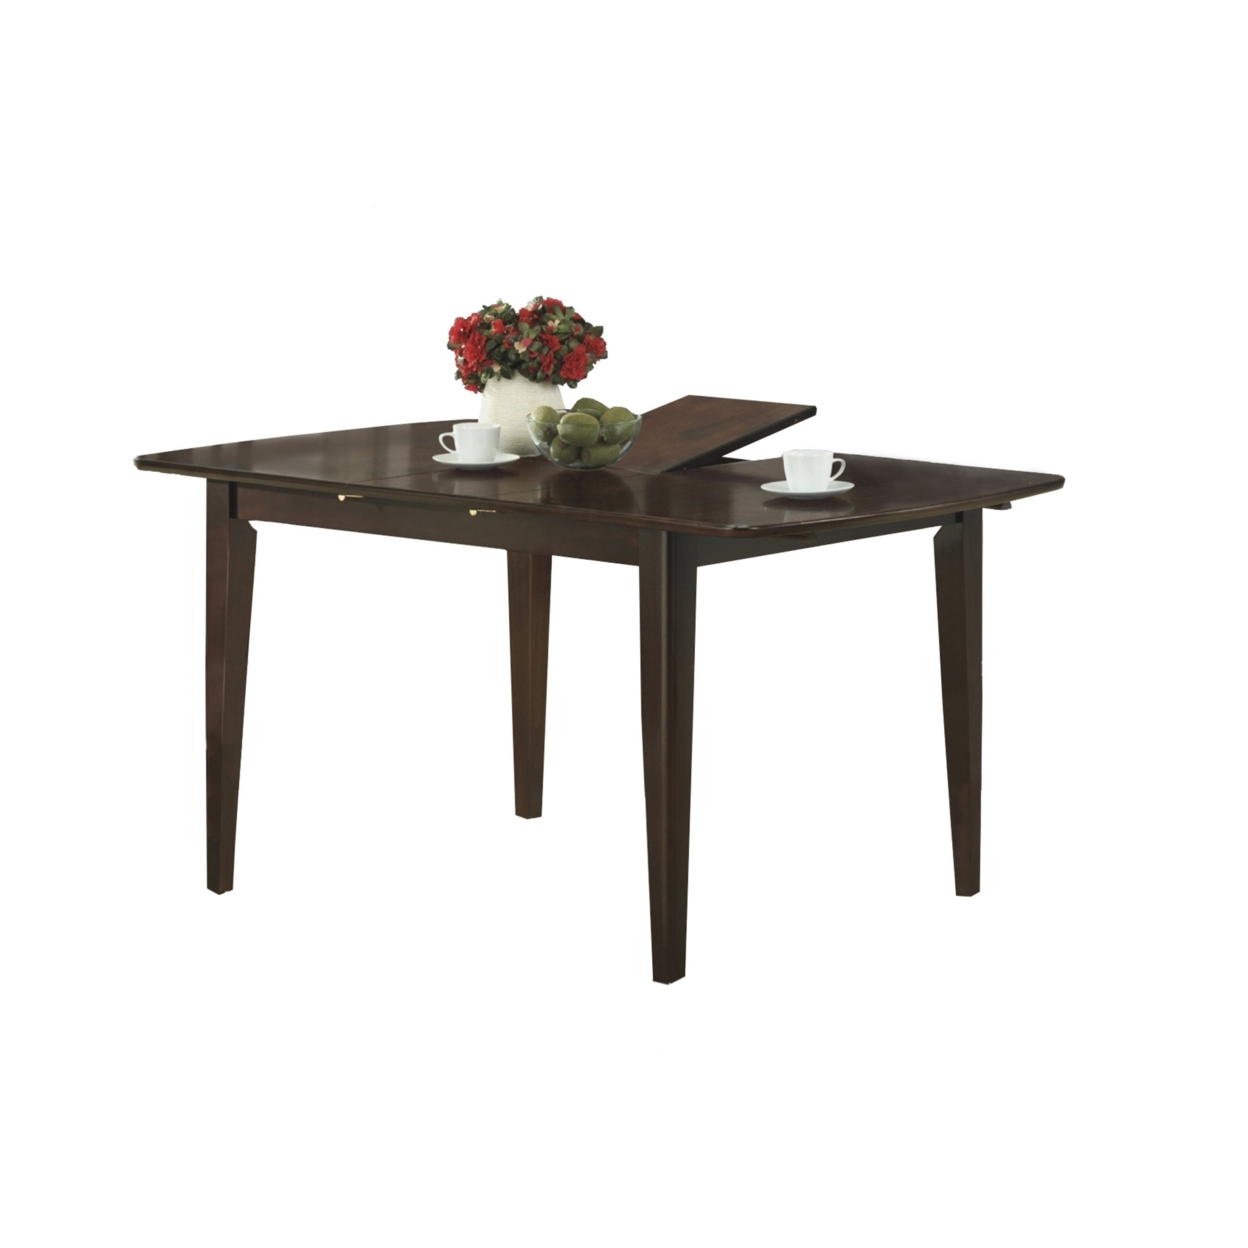 35.5" x 60" x 30" Cappuccino Solid Wood Dining Table With A Leaf